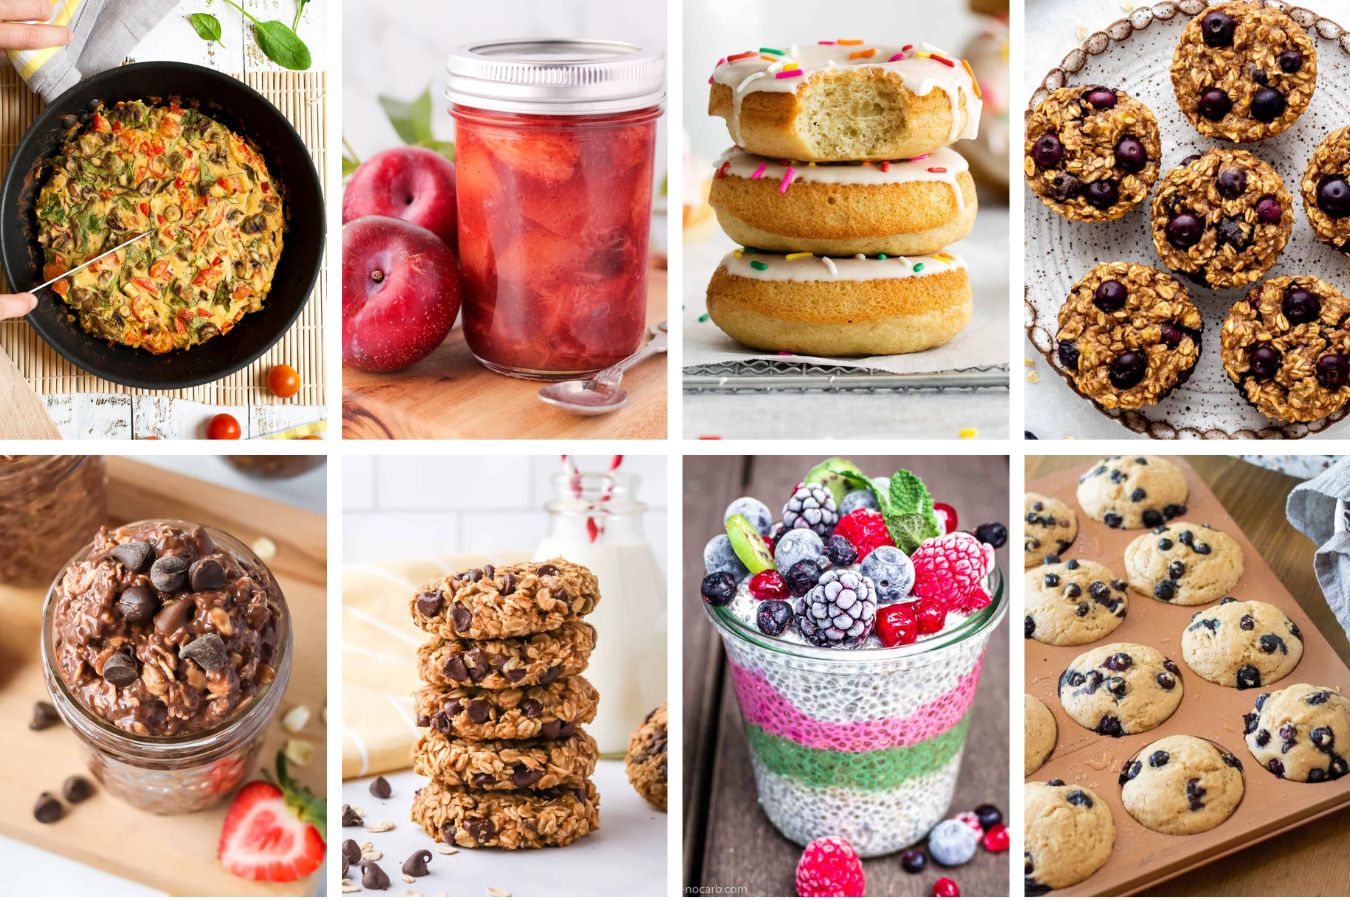 8 images of gluten free and dairy free breakfasts